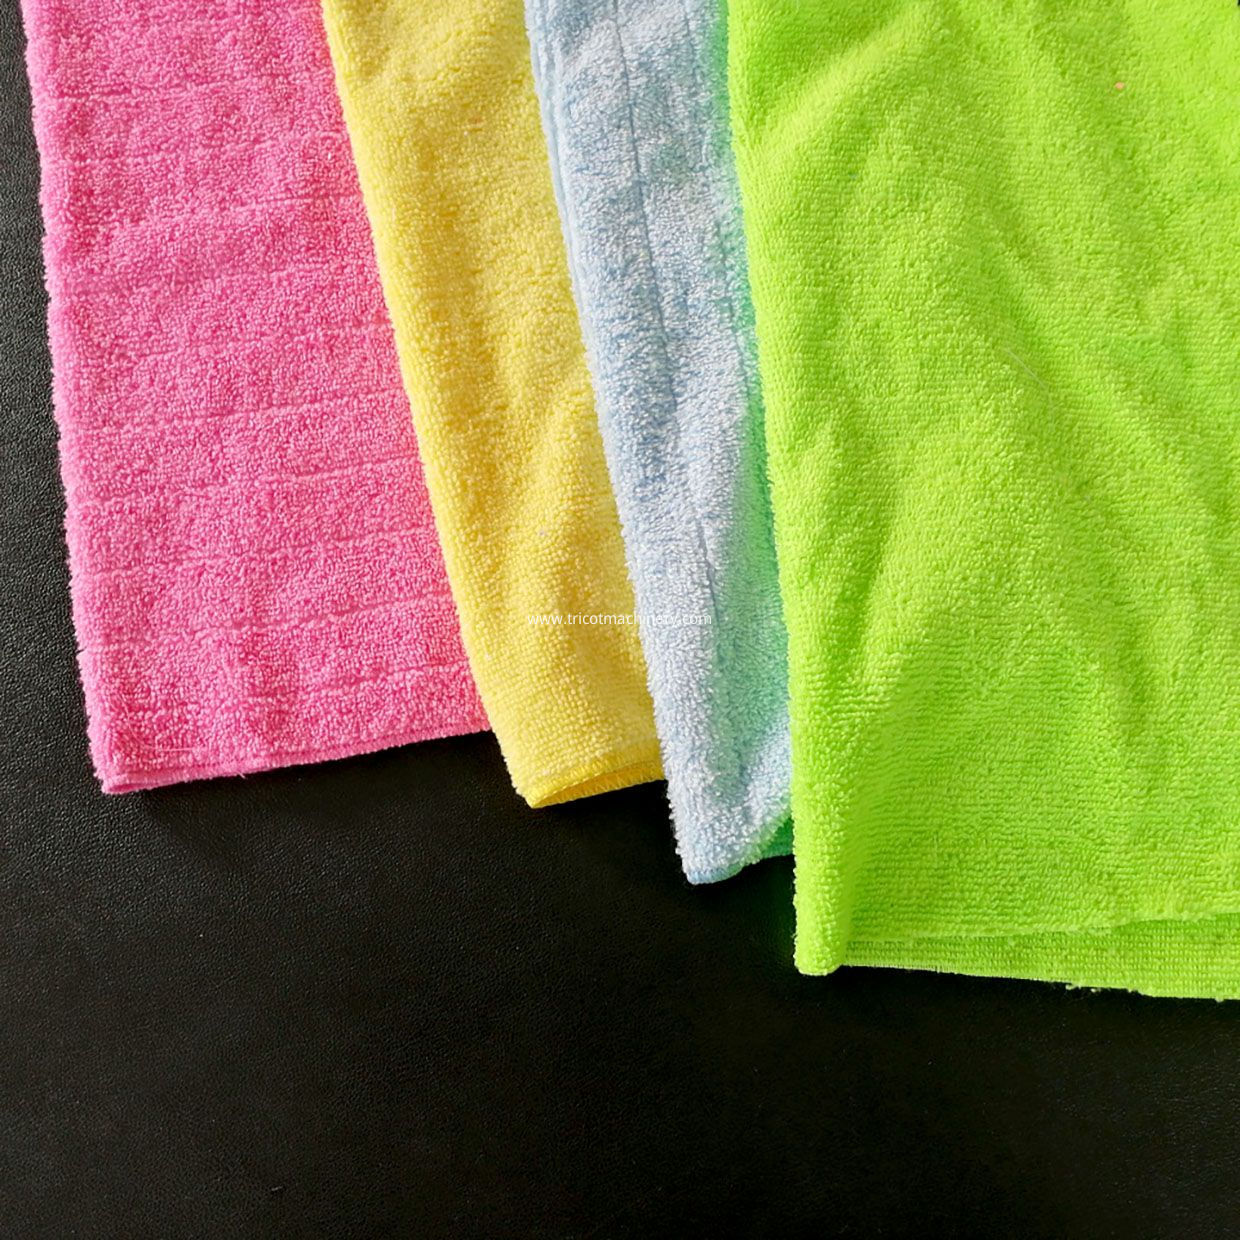 terry towels